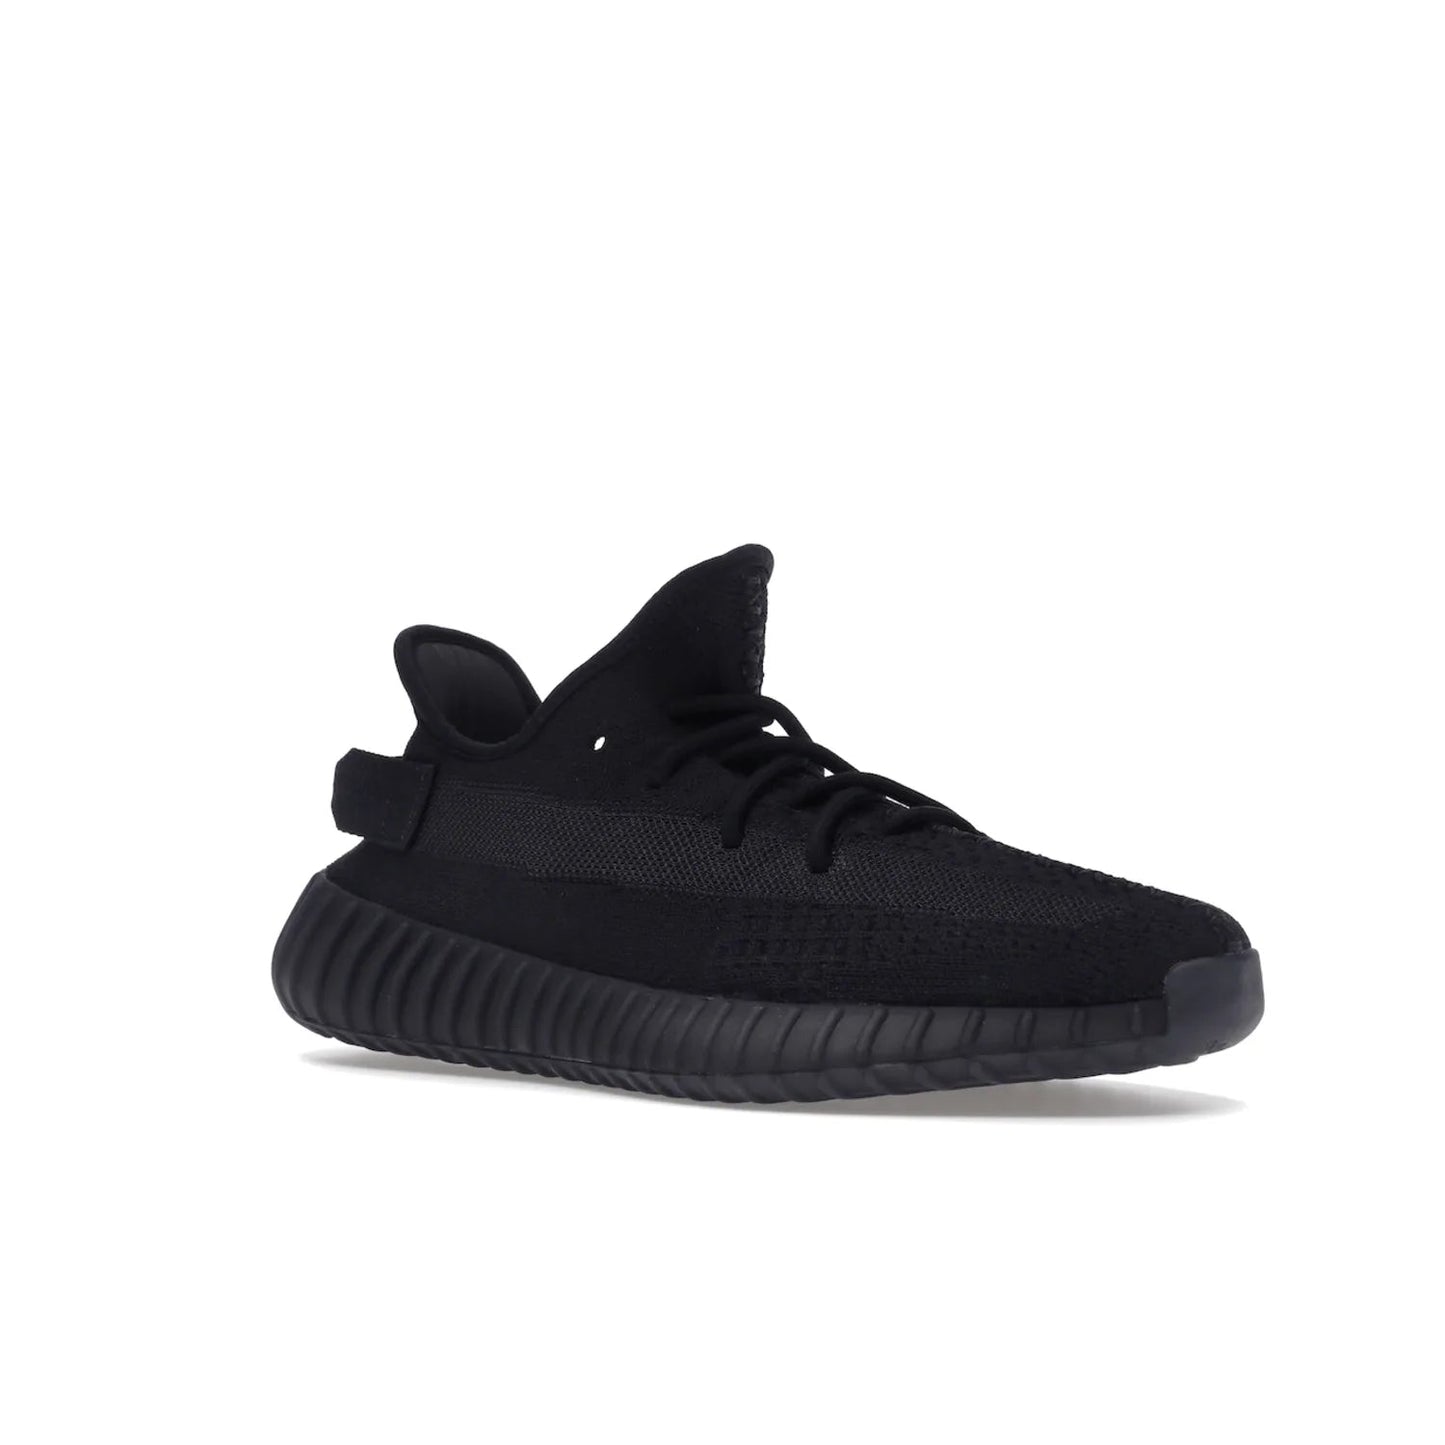 adidas Yeezy Boost 350 V2 Onyx - Image 5 - Only at www.BallersClubKickz.com - Adidas Yeezy Boost 350 V2 Onyx Triple Black shoes for comfort and style. Arriving Spring 2022.